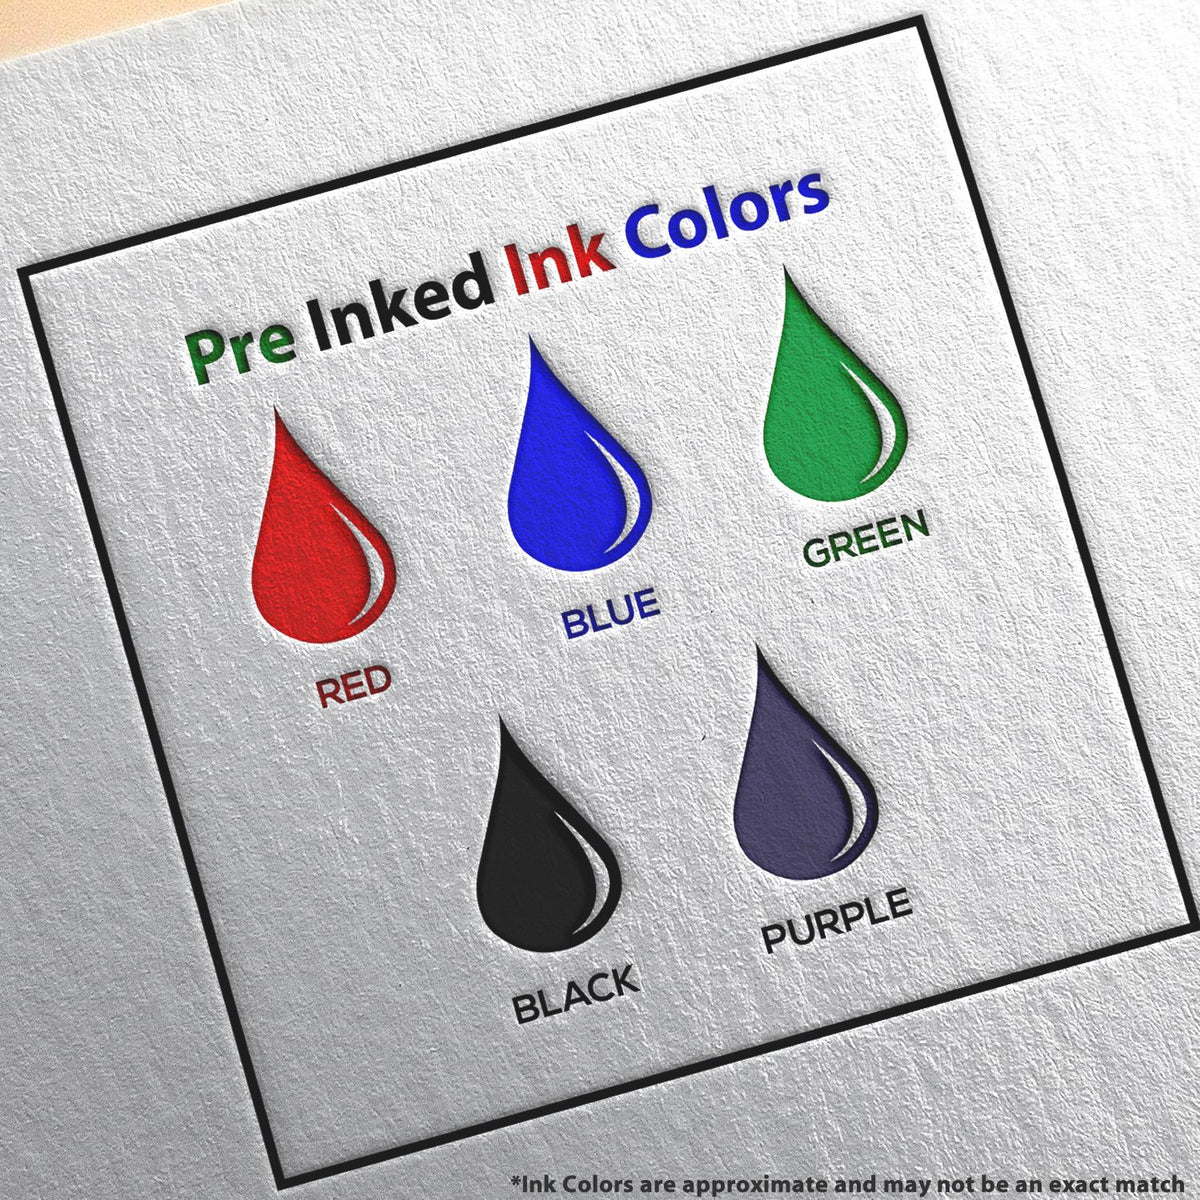 A picture showing the different ink colors or hues available for the Slim Pre-Inked Arizona Landscape Architect Seal Stamp product.